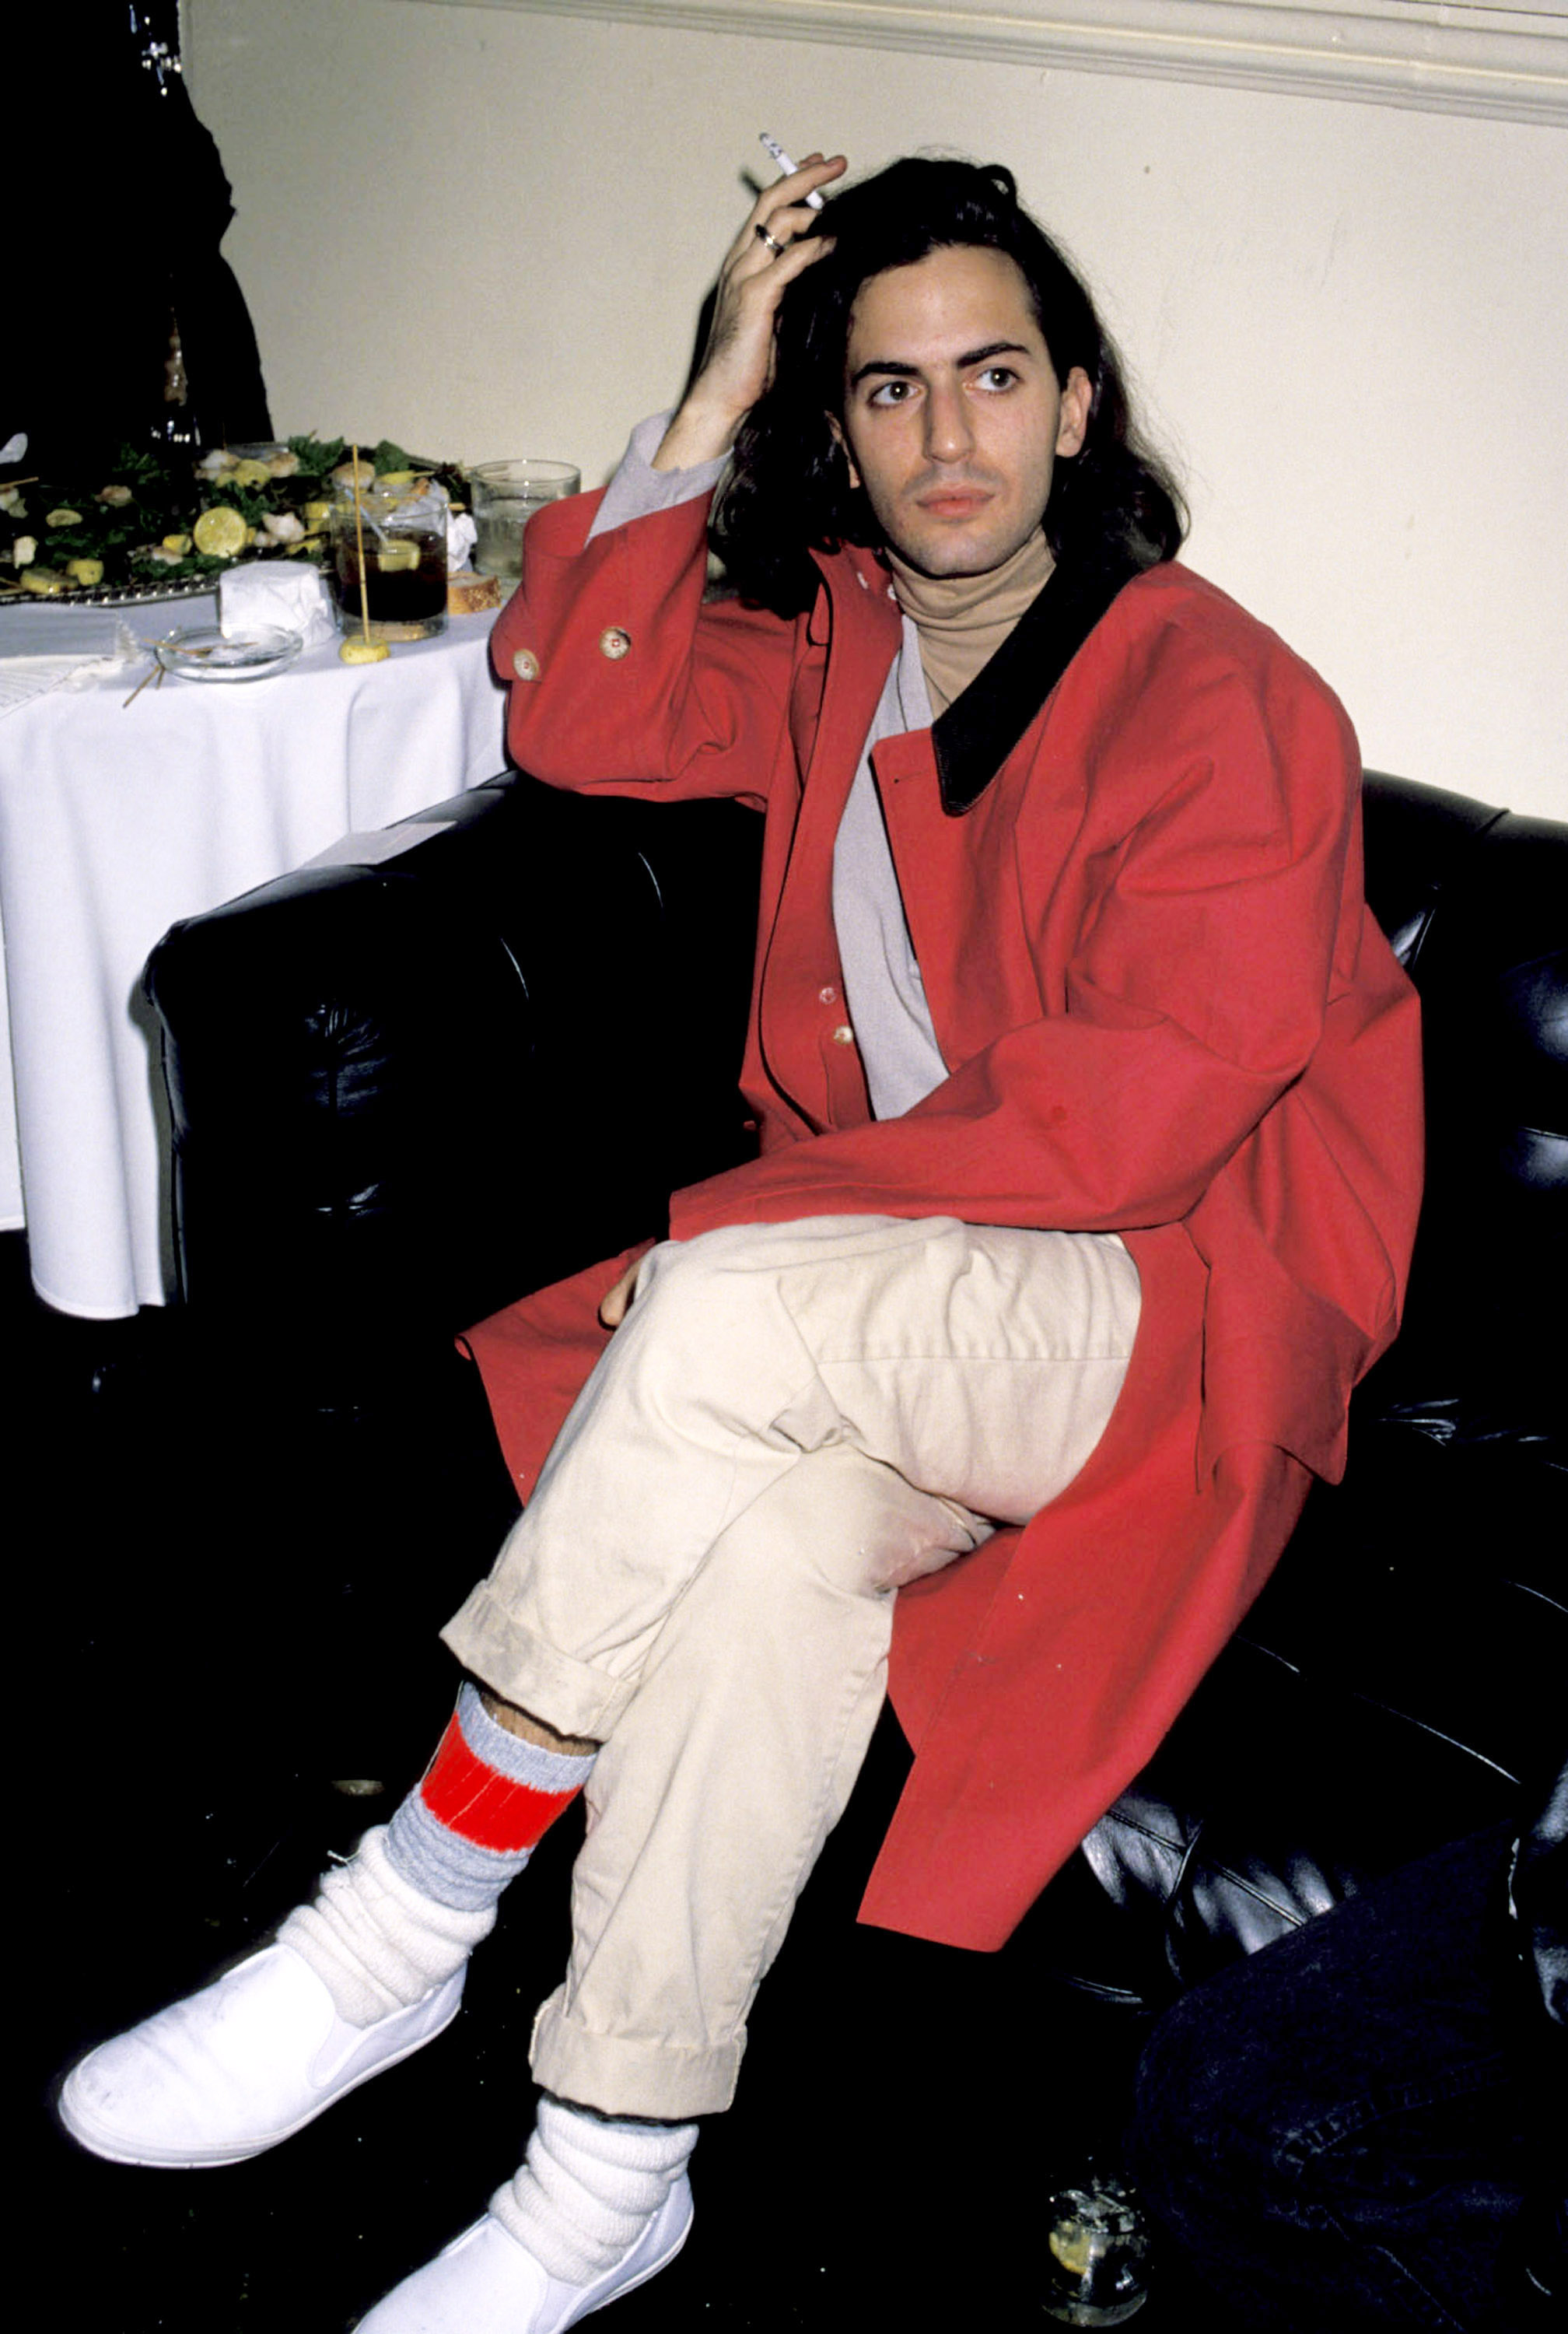 Marc Jacobs - Influential Designers